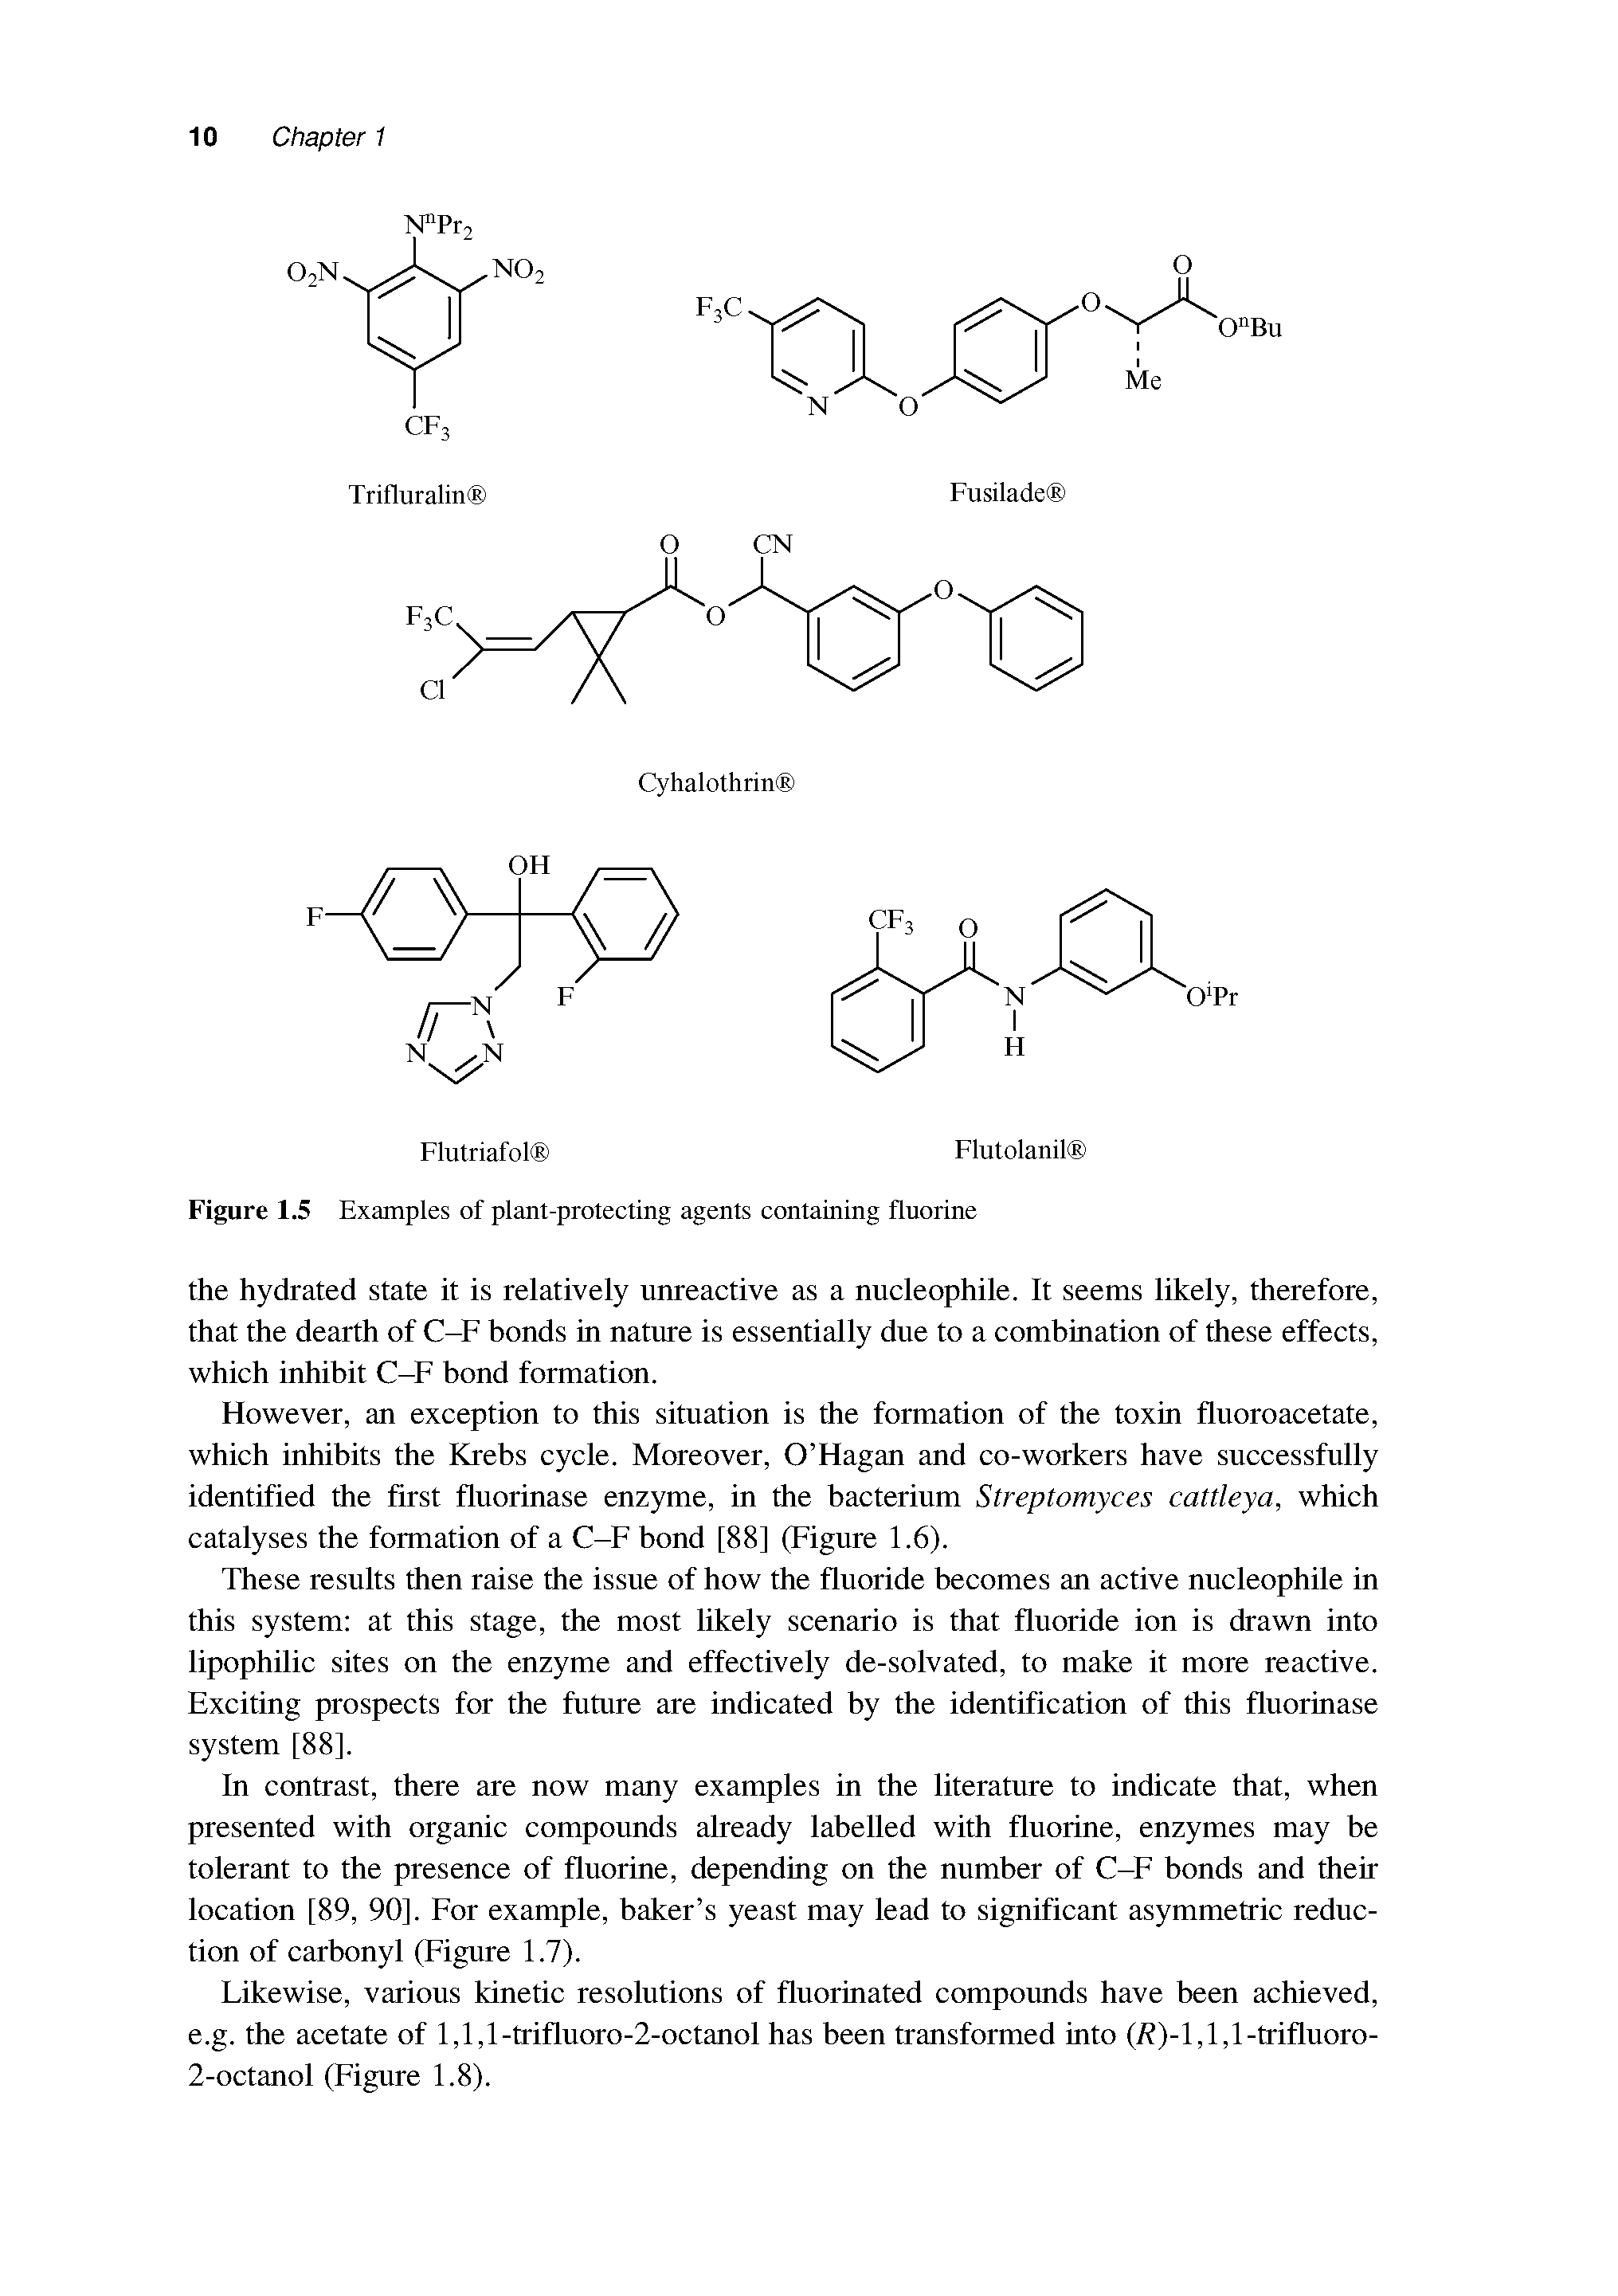 Figure 1.5 Examples of plant-protecting agents containing fluorine...